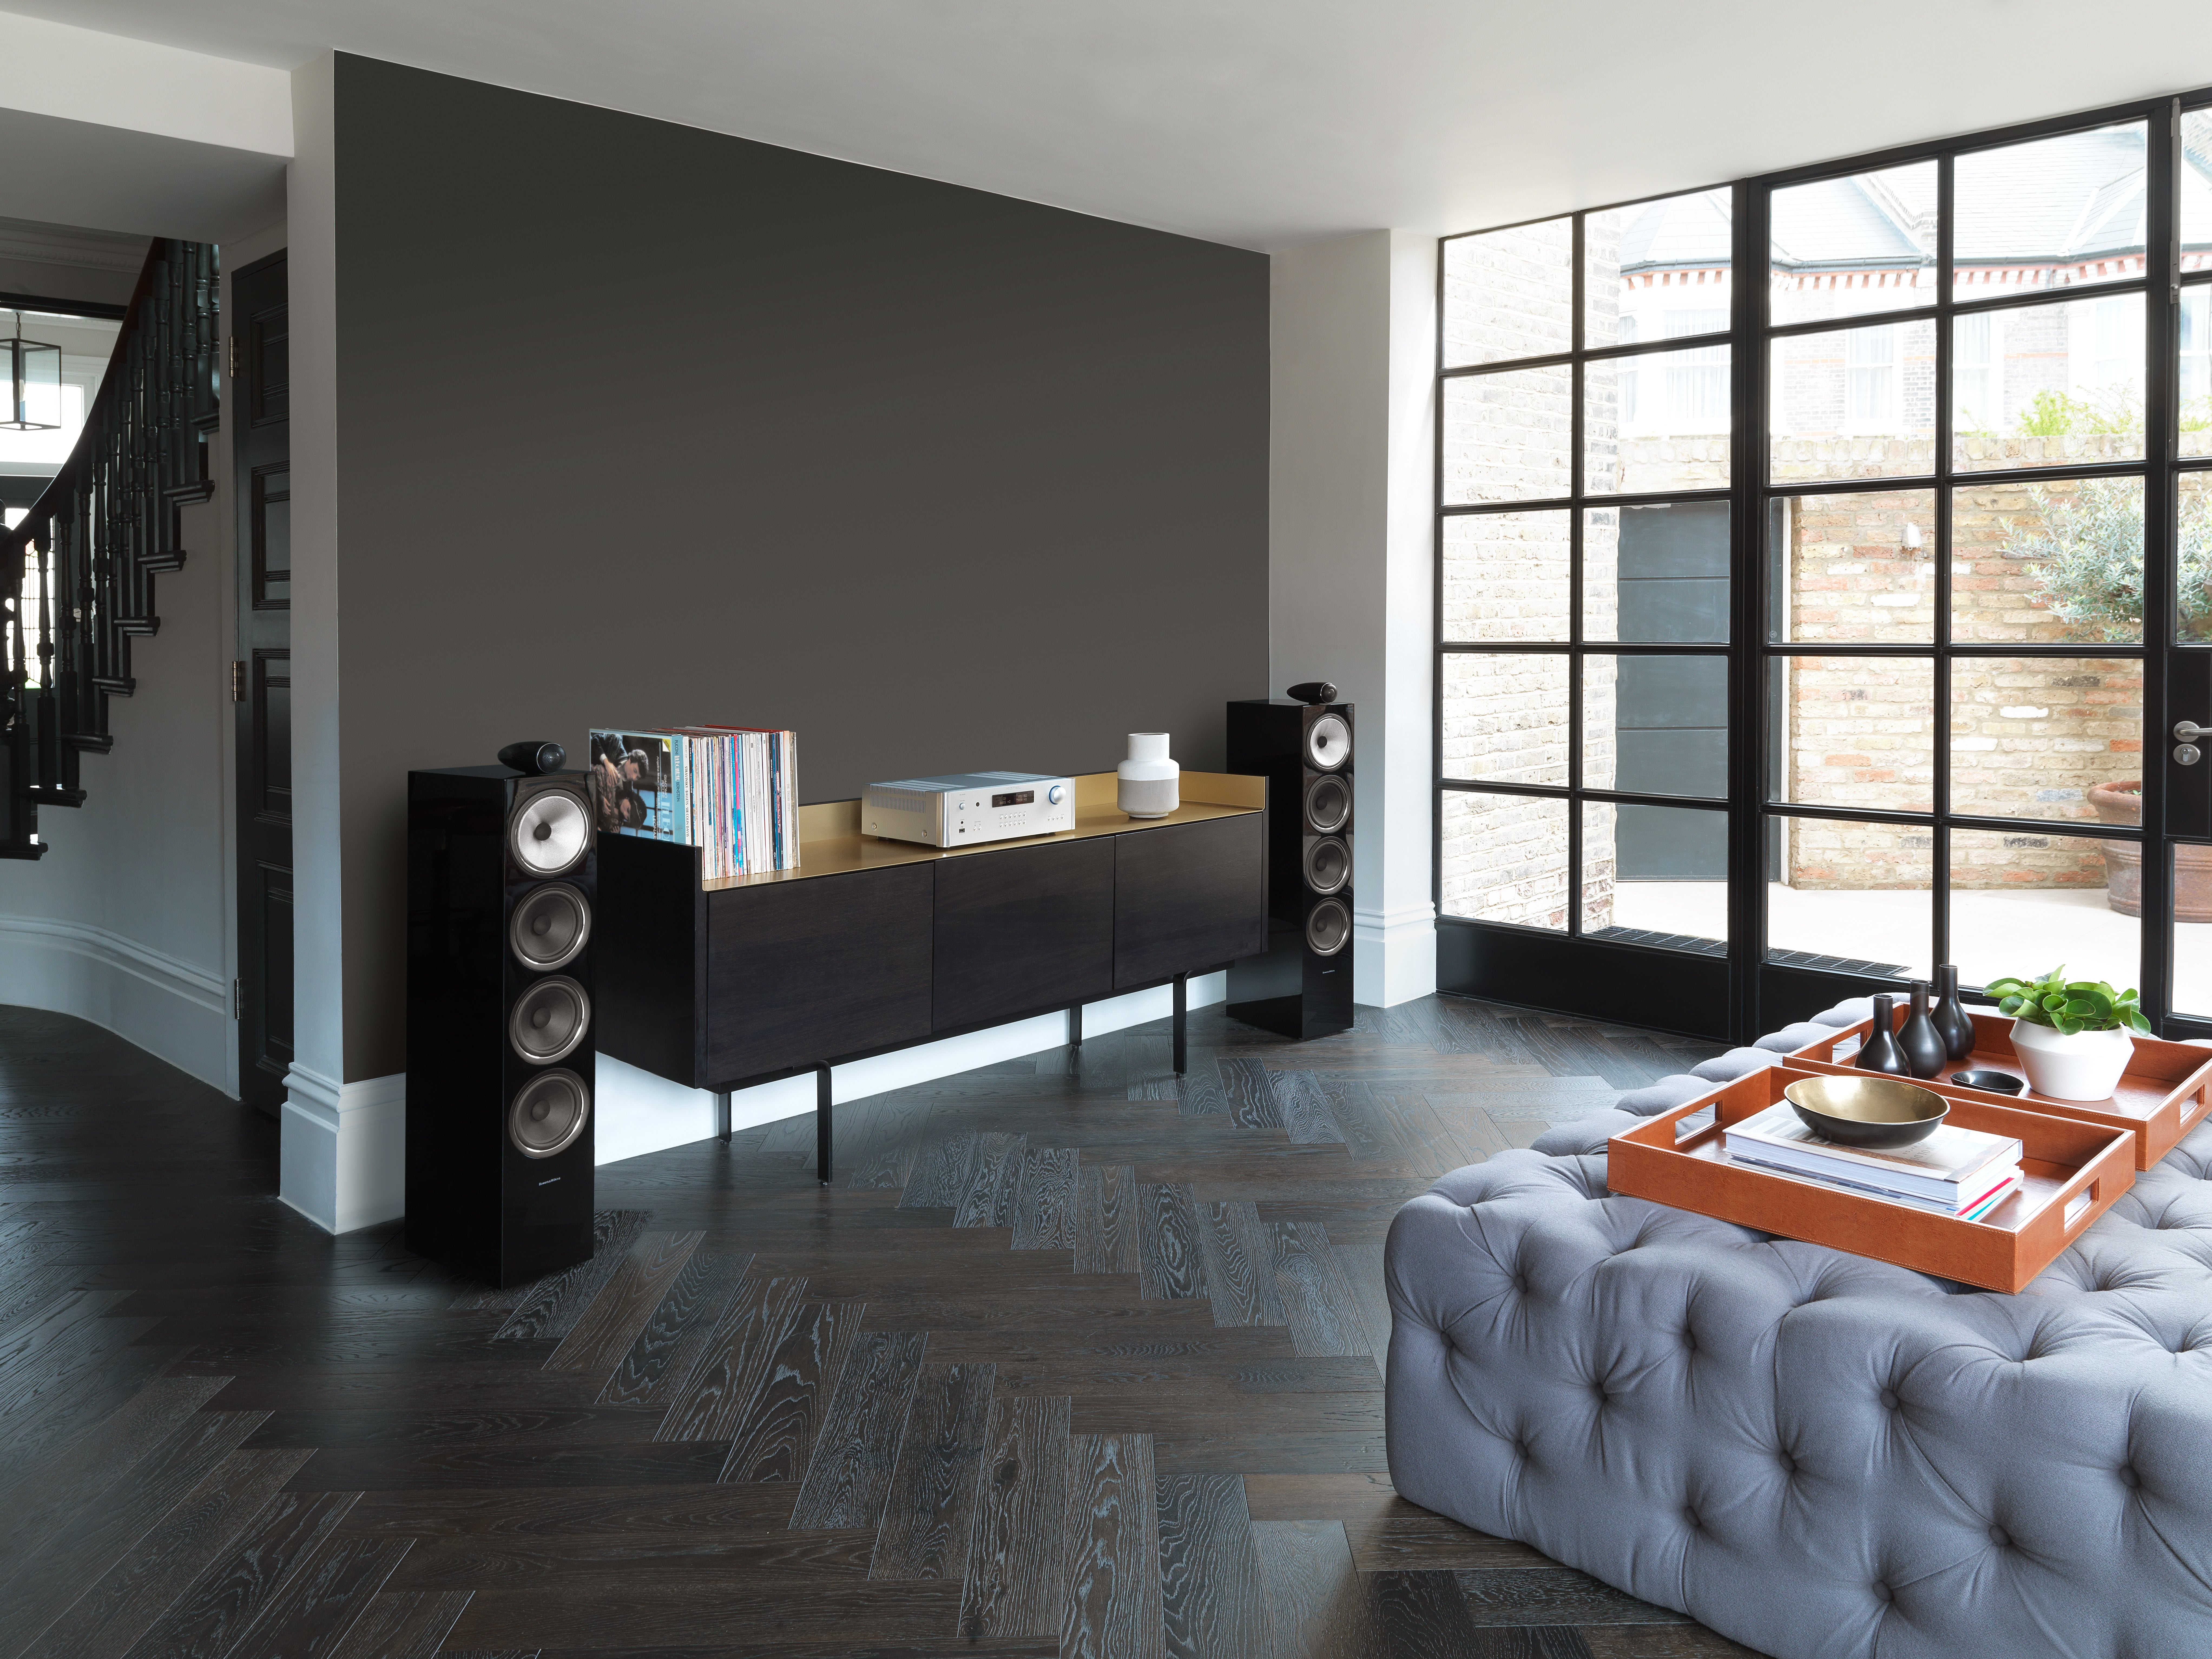 B&W Bowers Wilkins 700 Alex Giese Hannover